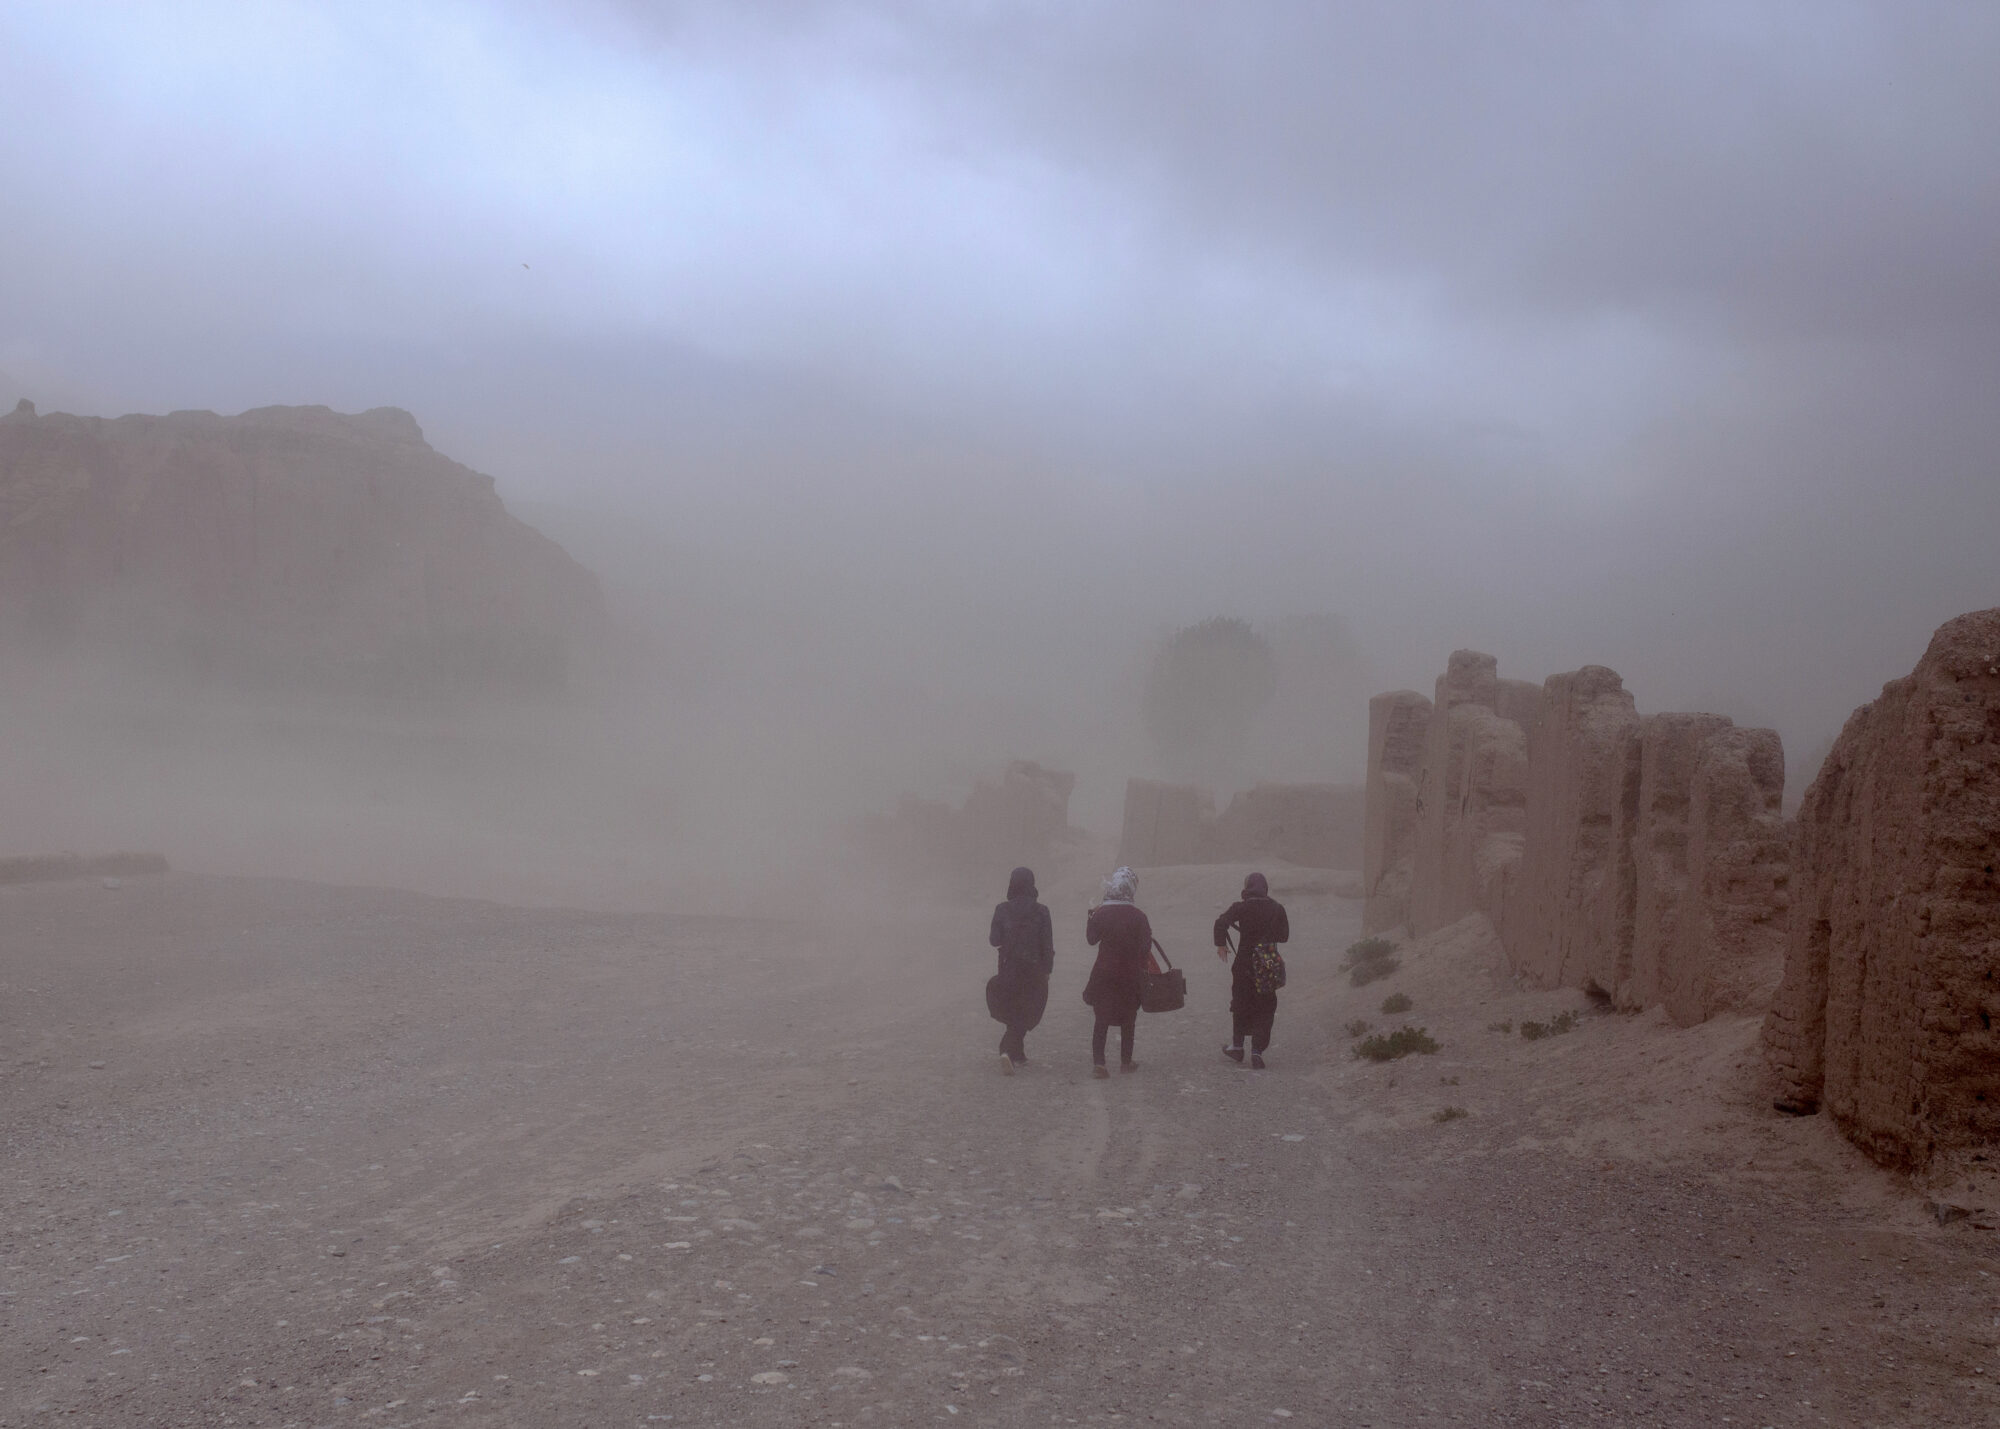 Three people walk along a dirt road past stone ruins. A thick layer of dust hangs in the air, obscuring the view of the distance.